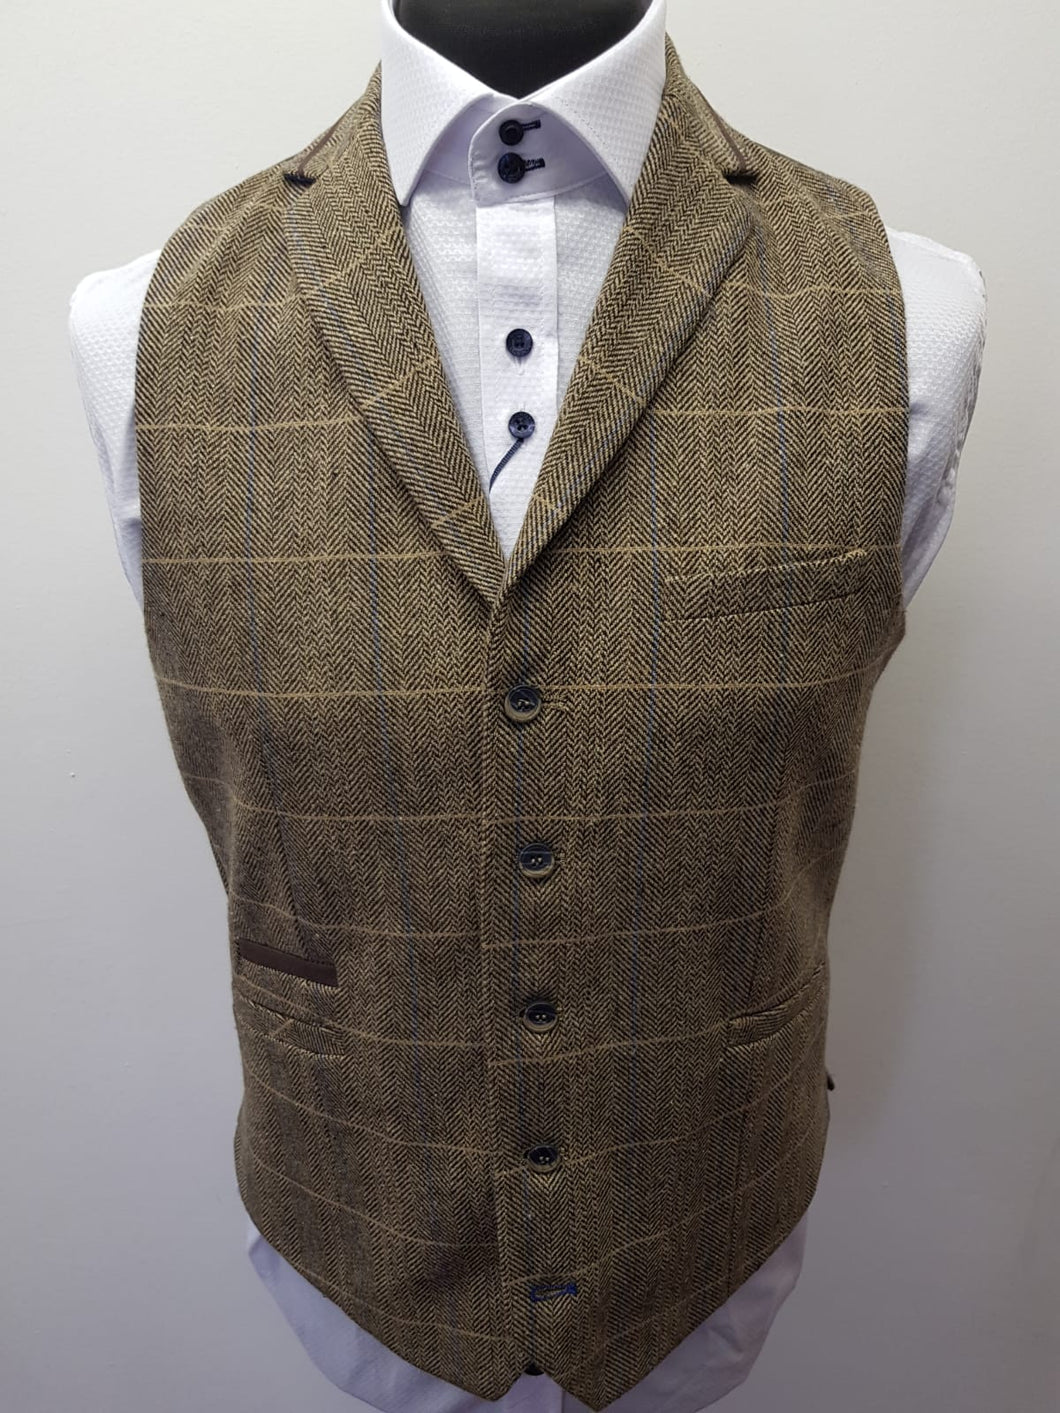 Cavani Albert Brown Tweed waistcoat with a shirt for a formal occasion inspired by Peaky Blinders